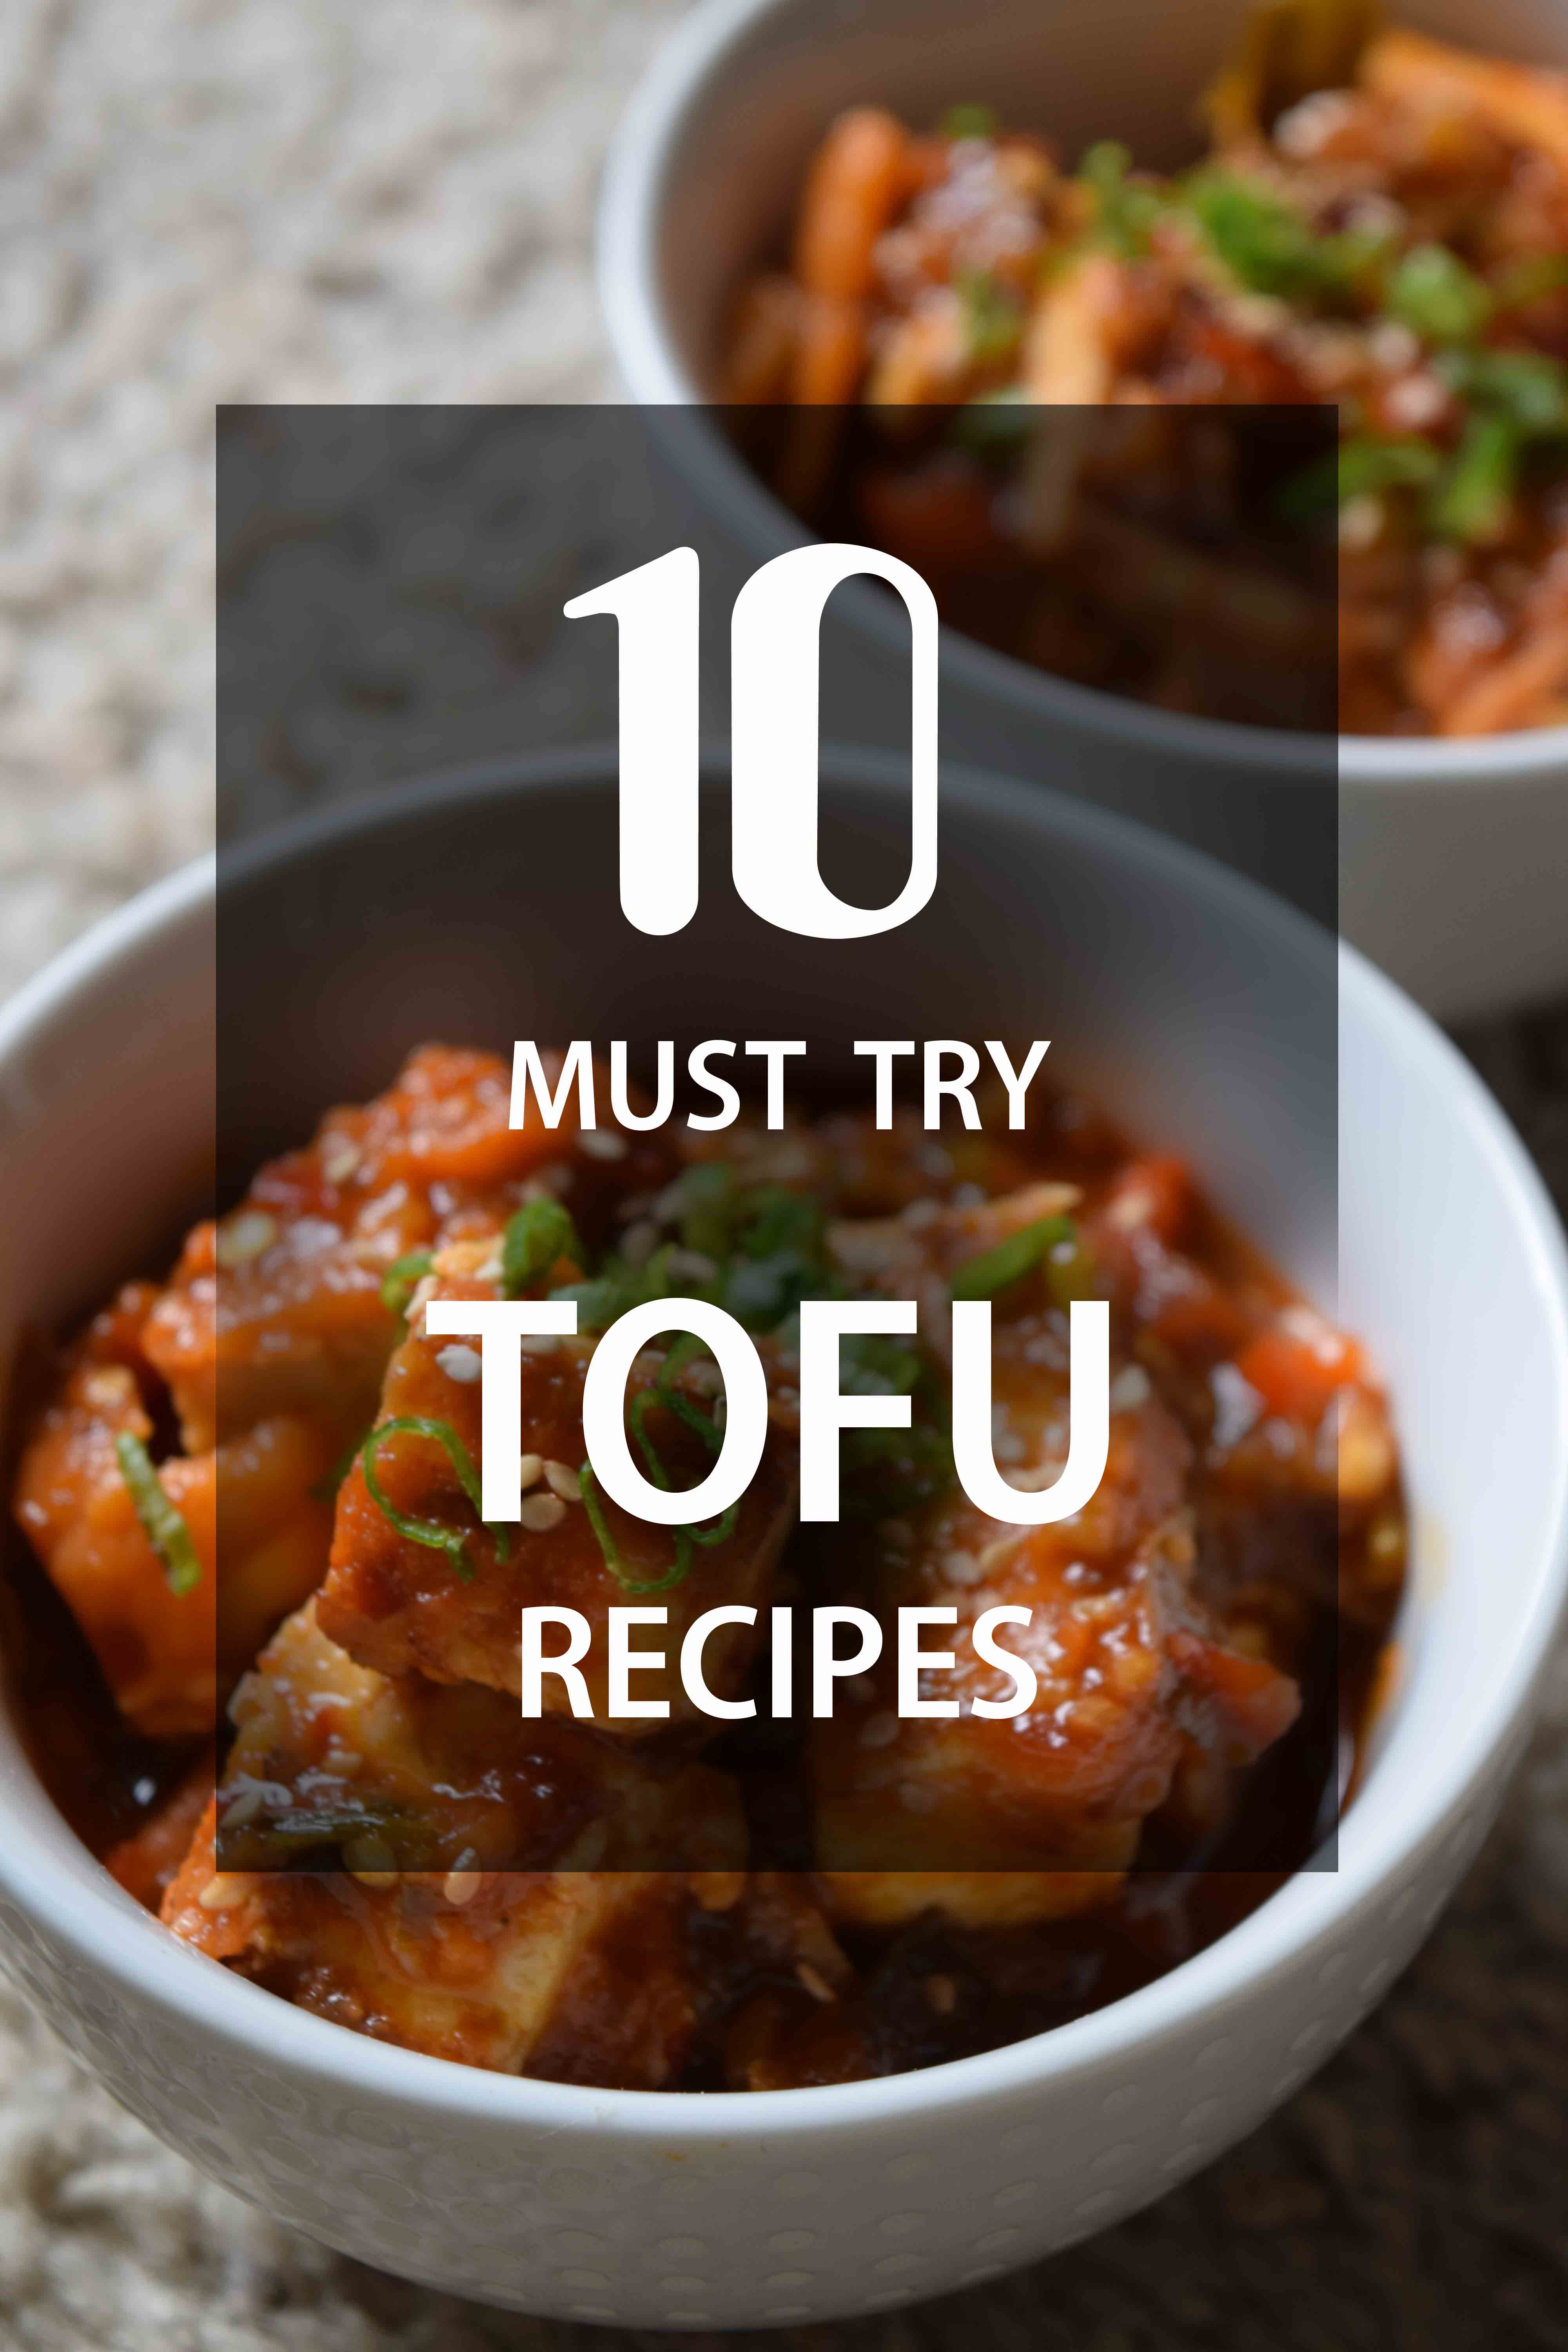 10 must try TOFU recipes